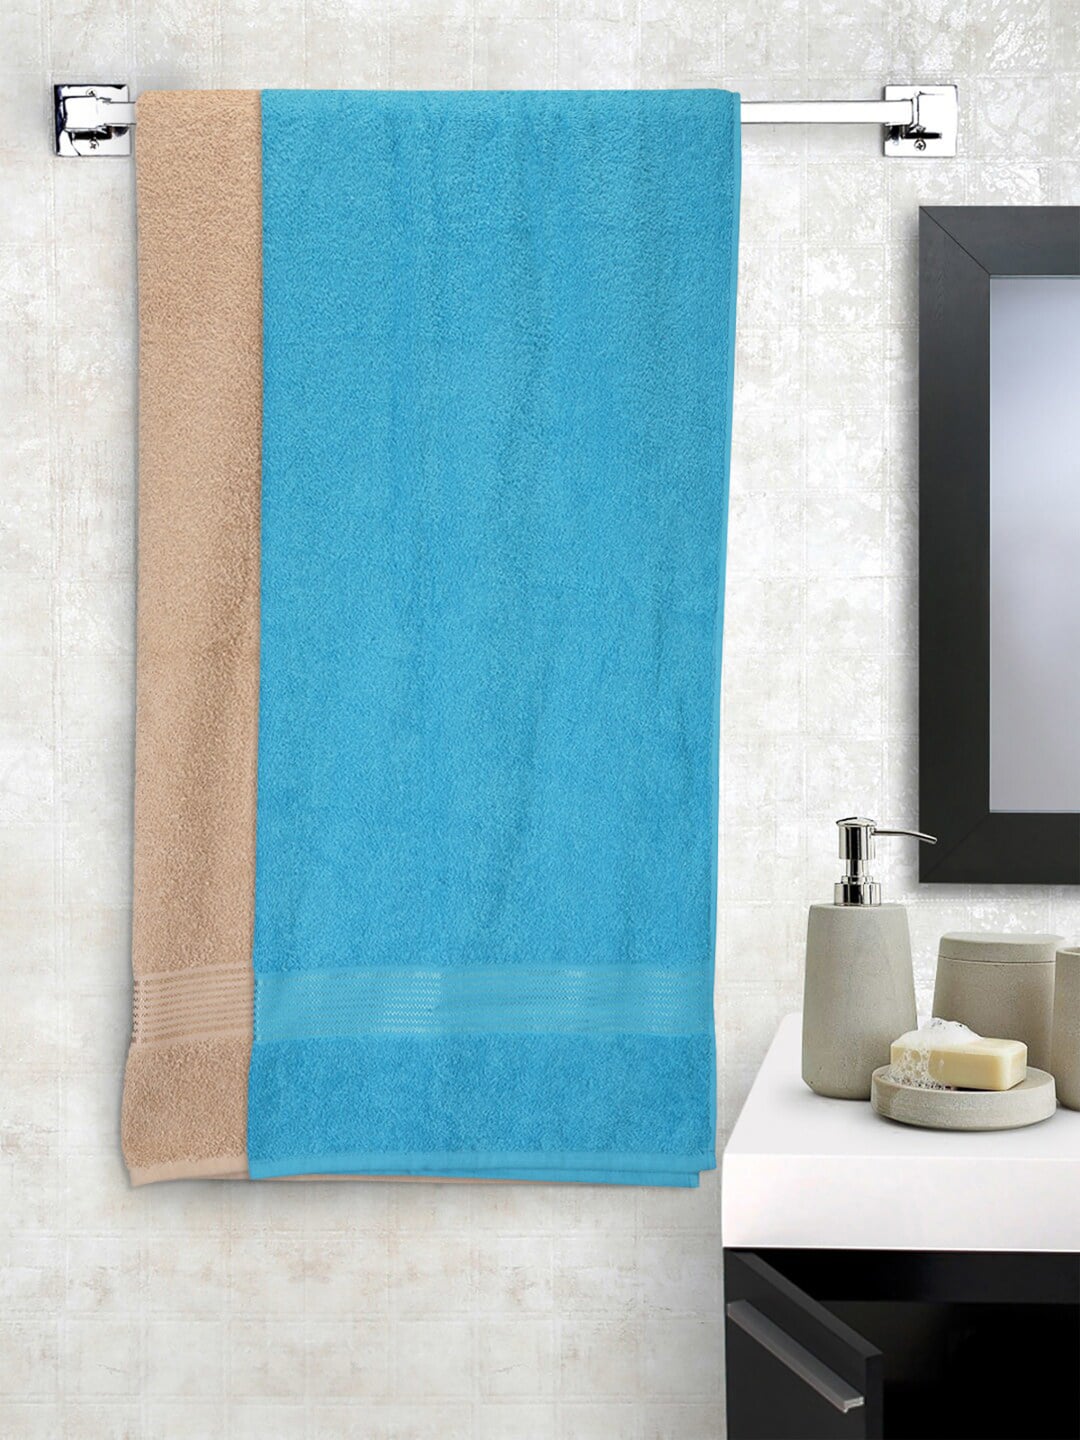 BIANCA Set Of 2 Turquoise Blue & Beige Solid 380 GSM Cotton Bath Towels Price in India